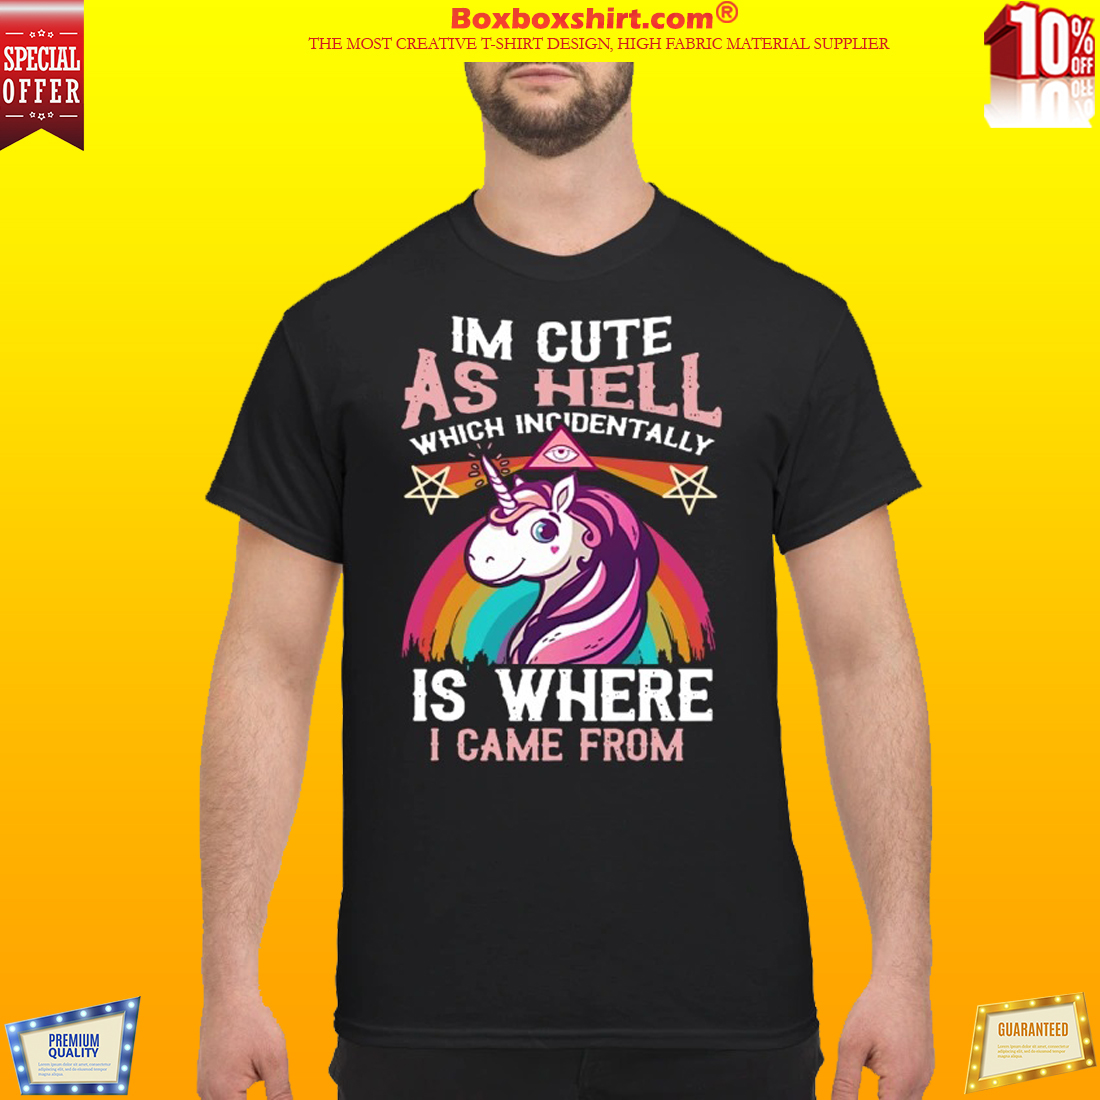 I'm cute as hell which incidentally is where I came from classic shirt